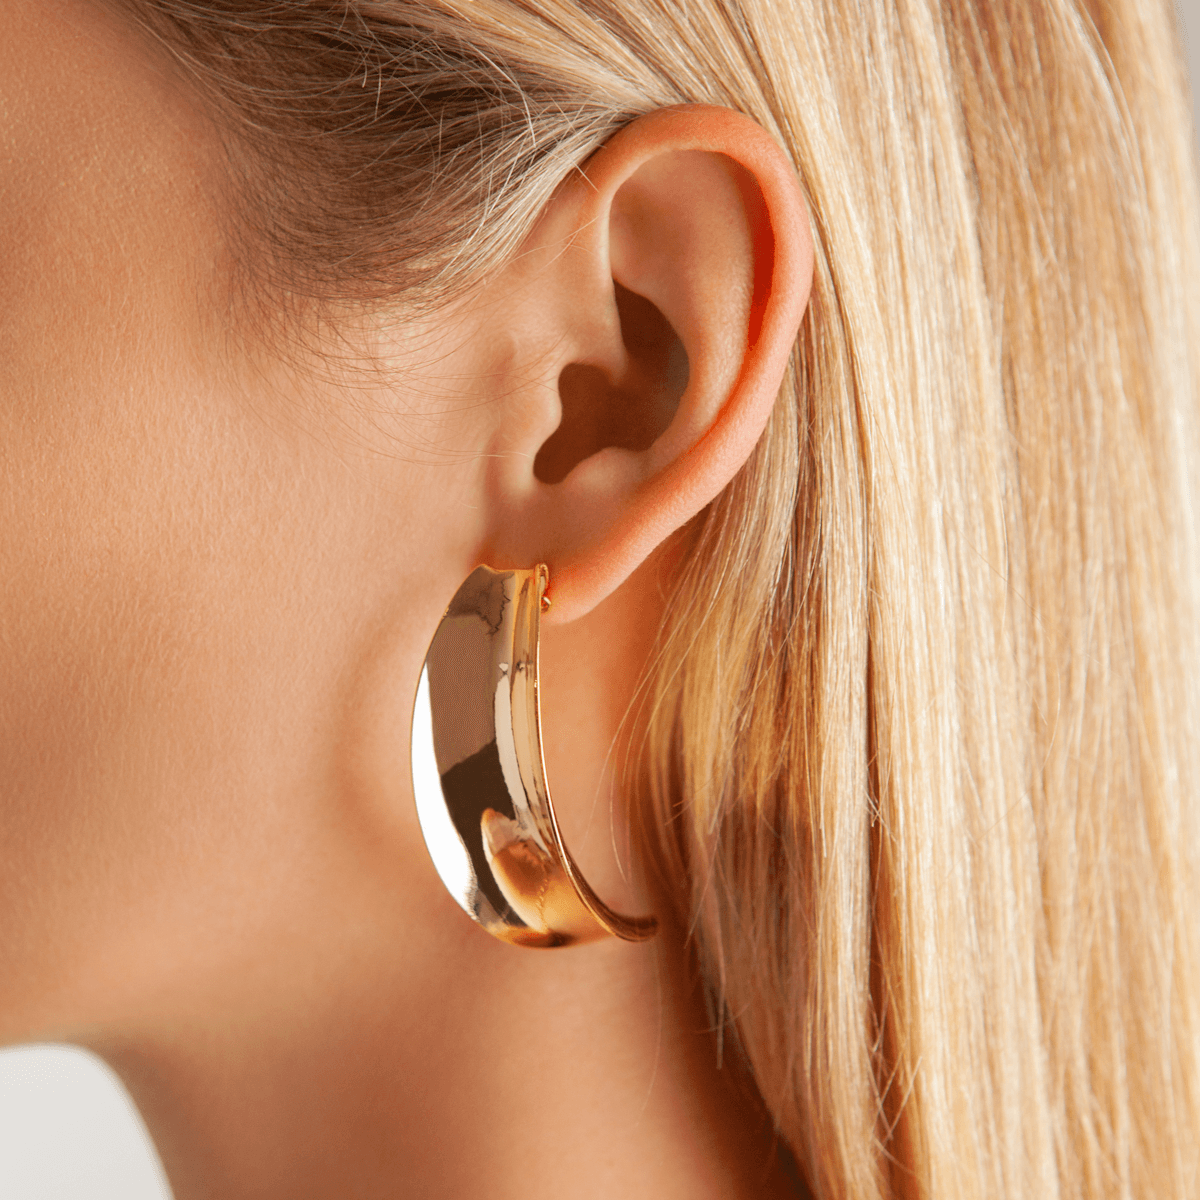 10 Must-Have Earrings to Complete Your Summer Look